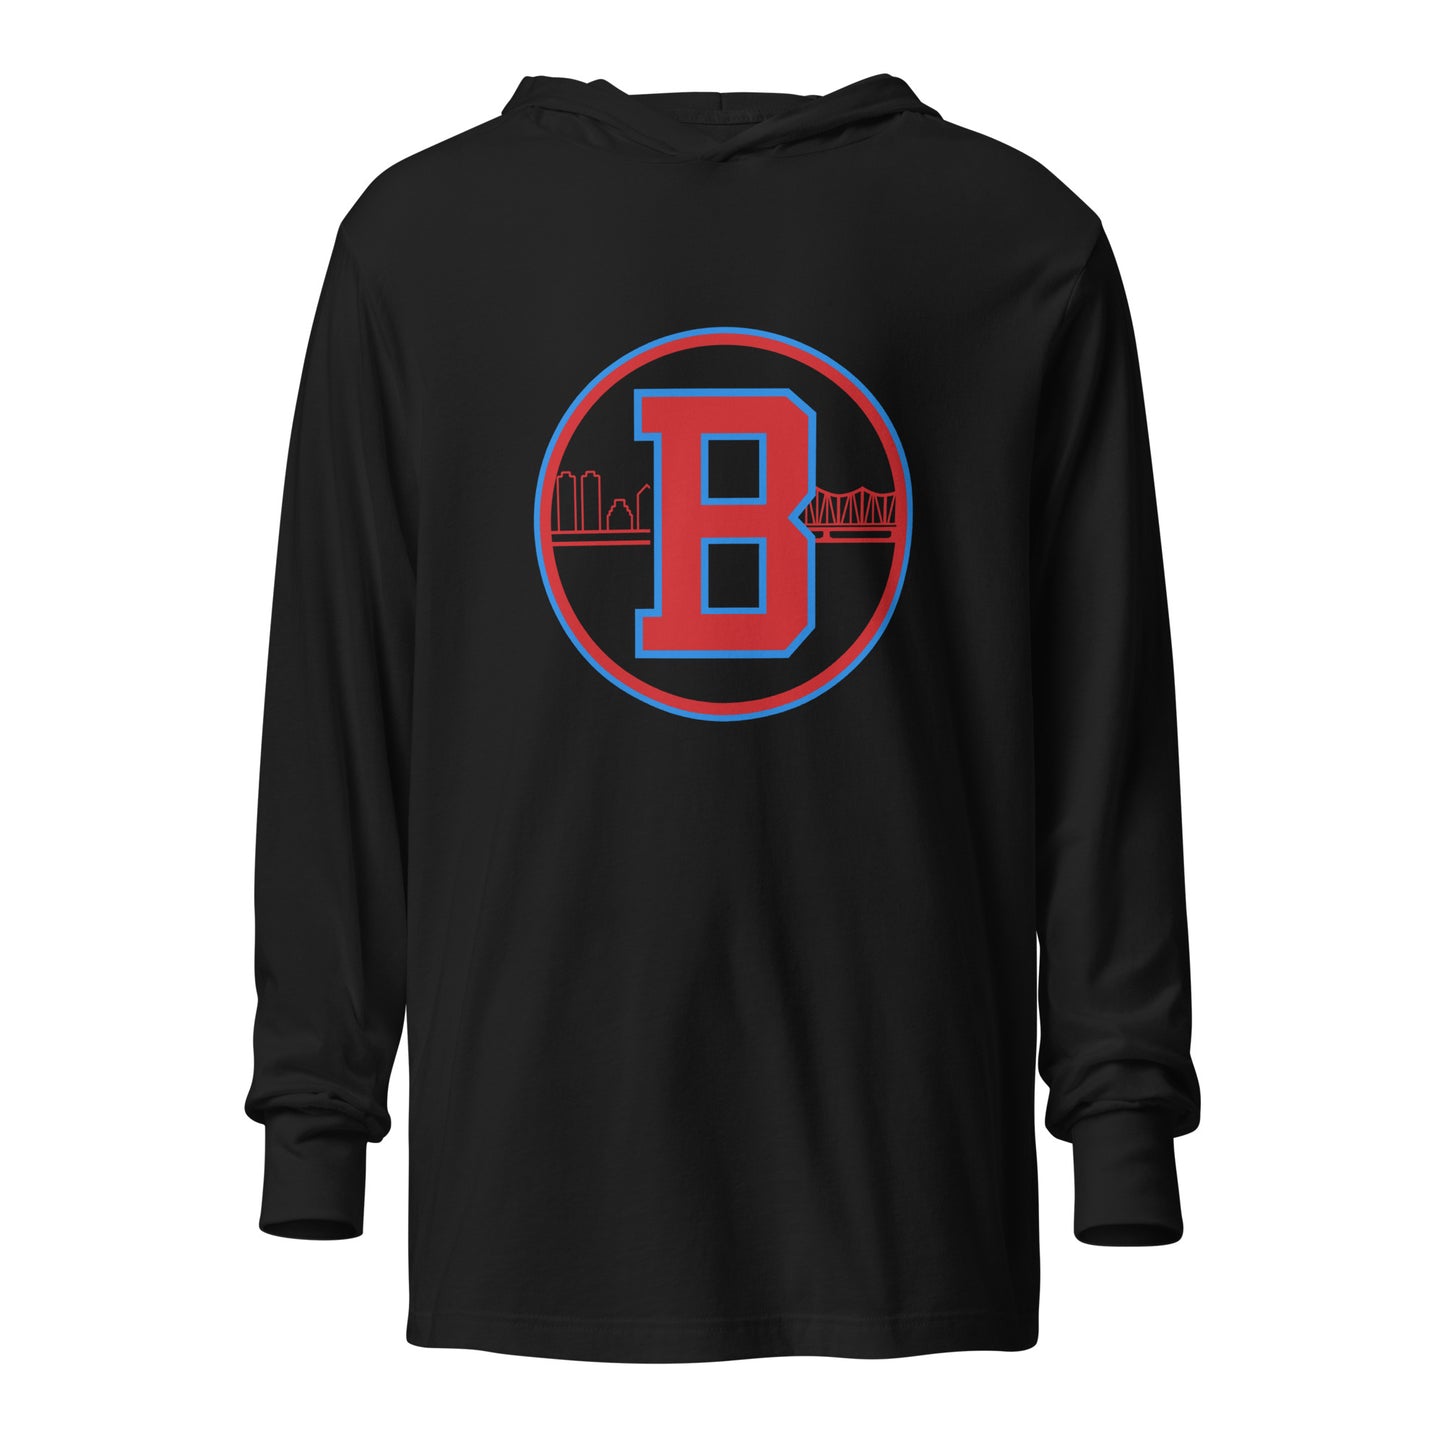 Home of the Brave Hooded Long Sleeve T-Shirt